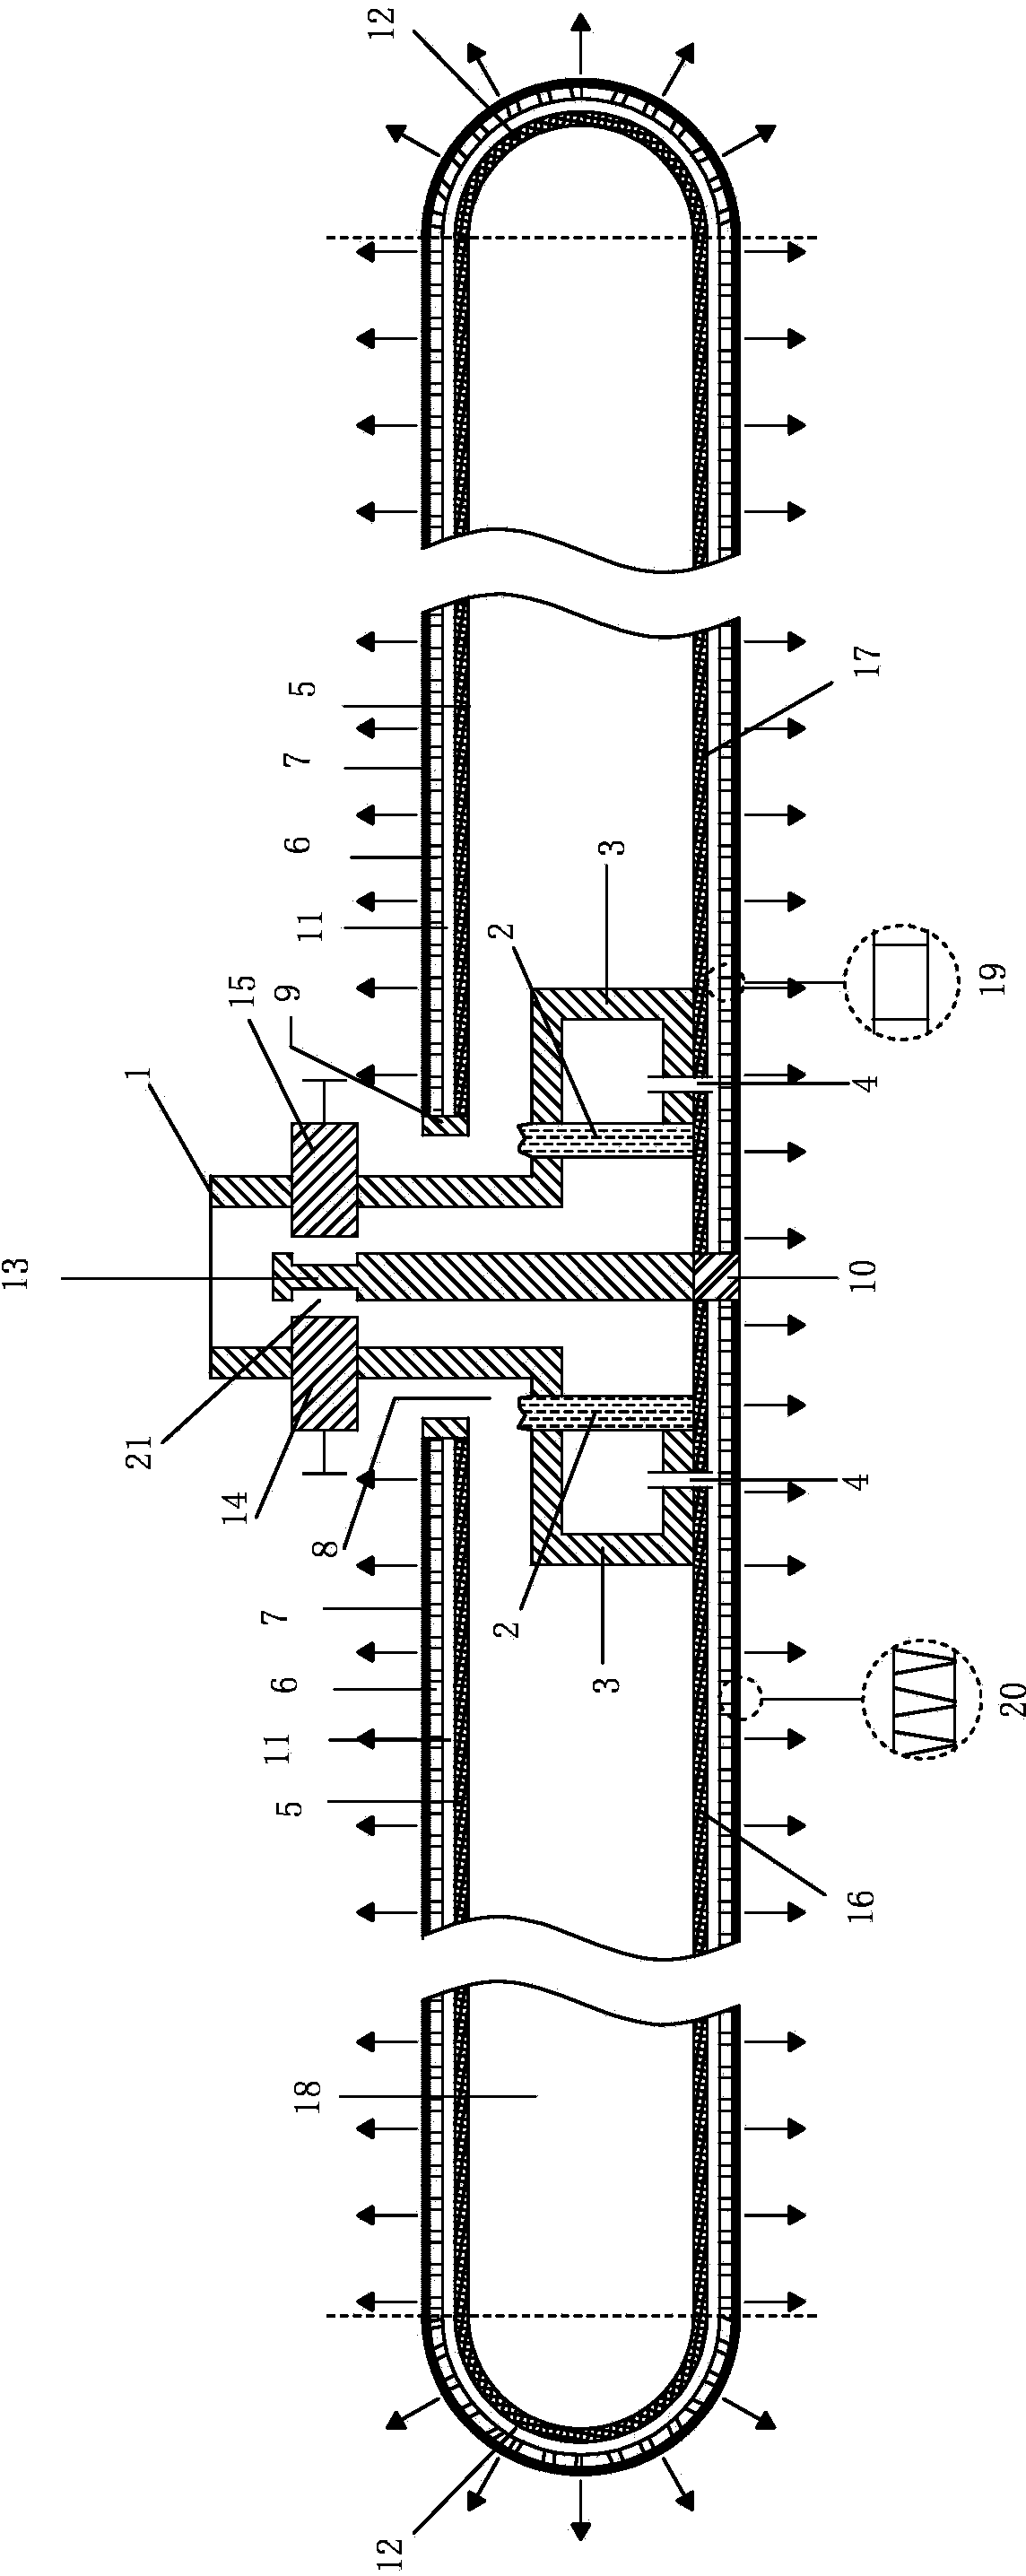 Aeration pipe with pipe end being hemispheric aeration plate